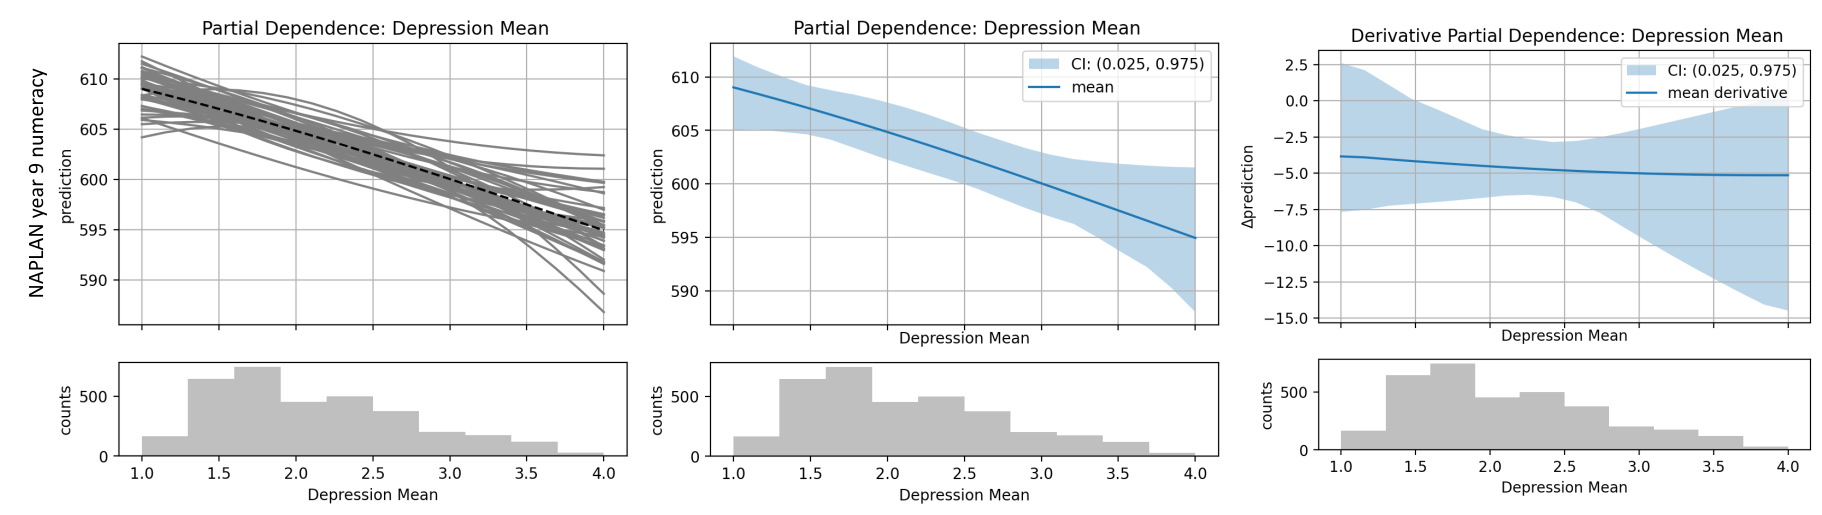 Example partial dependence plots